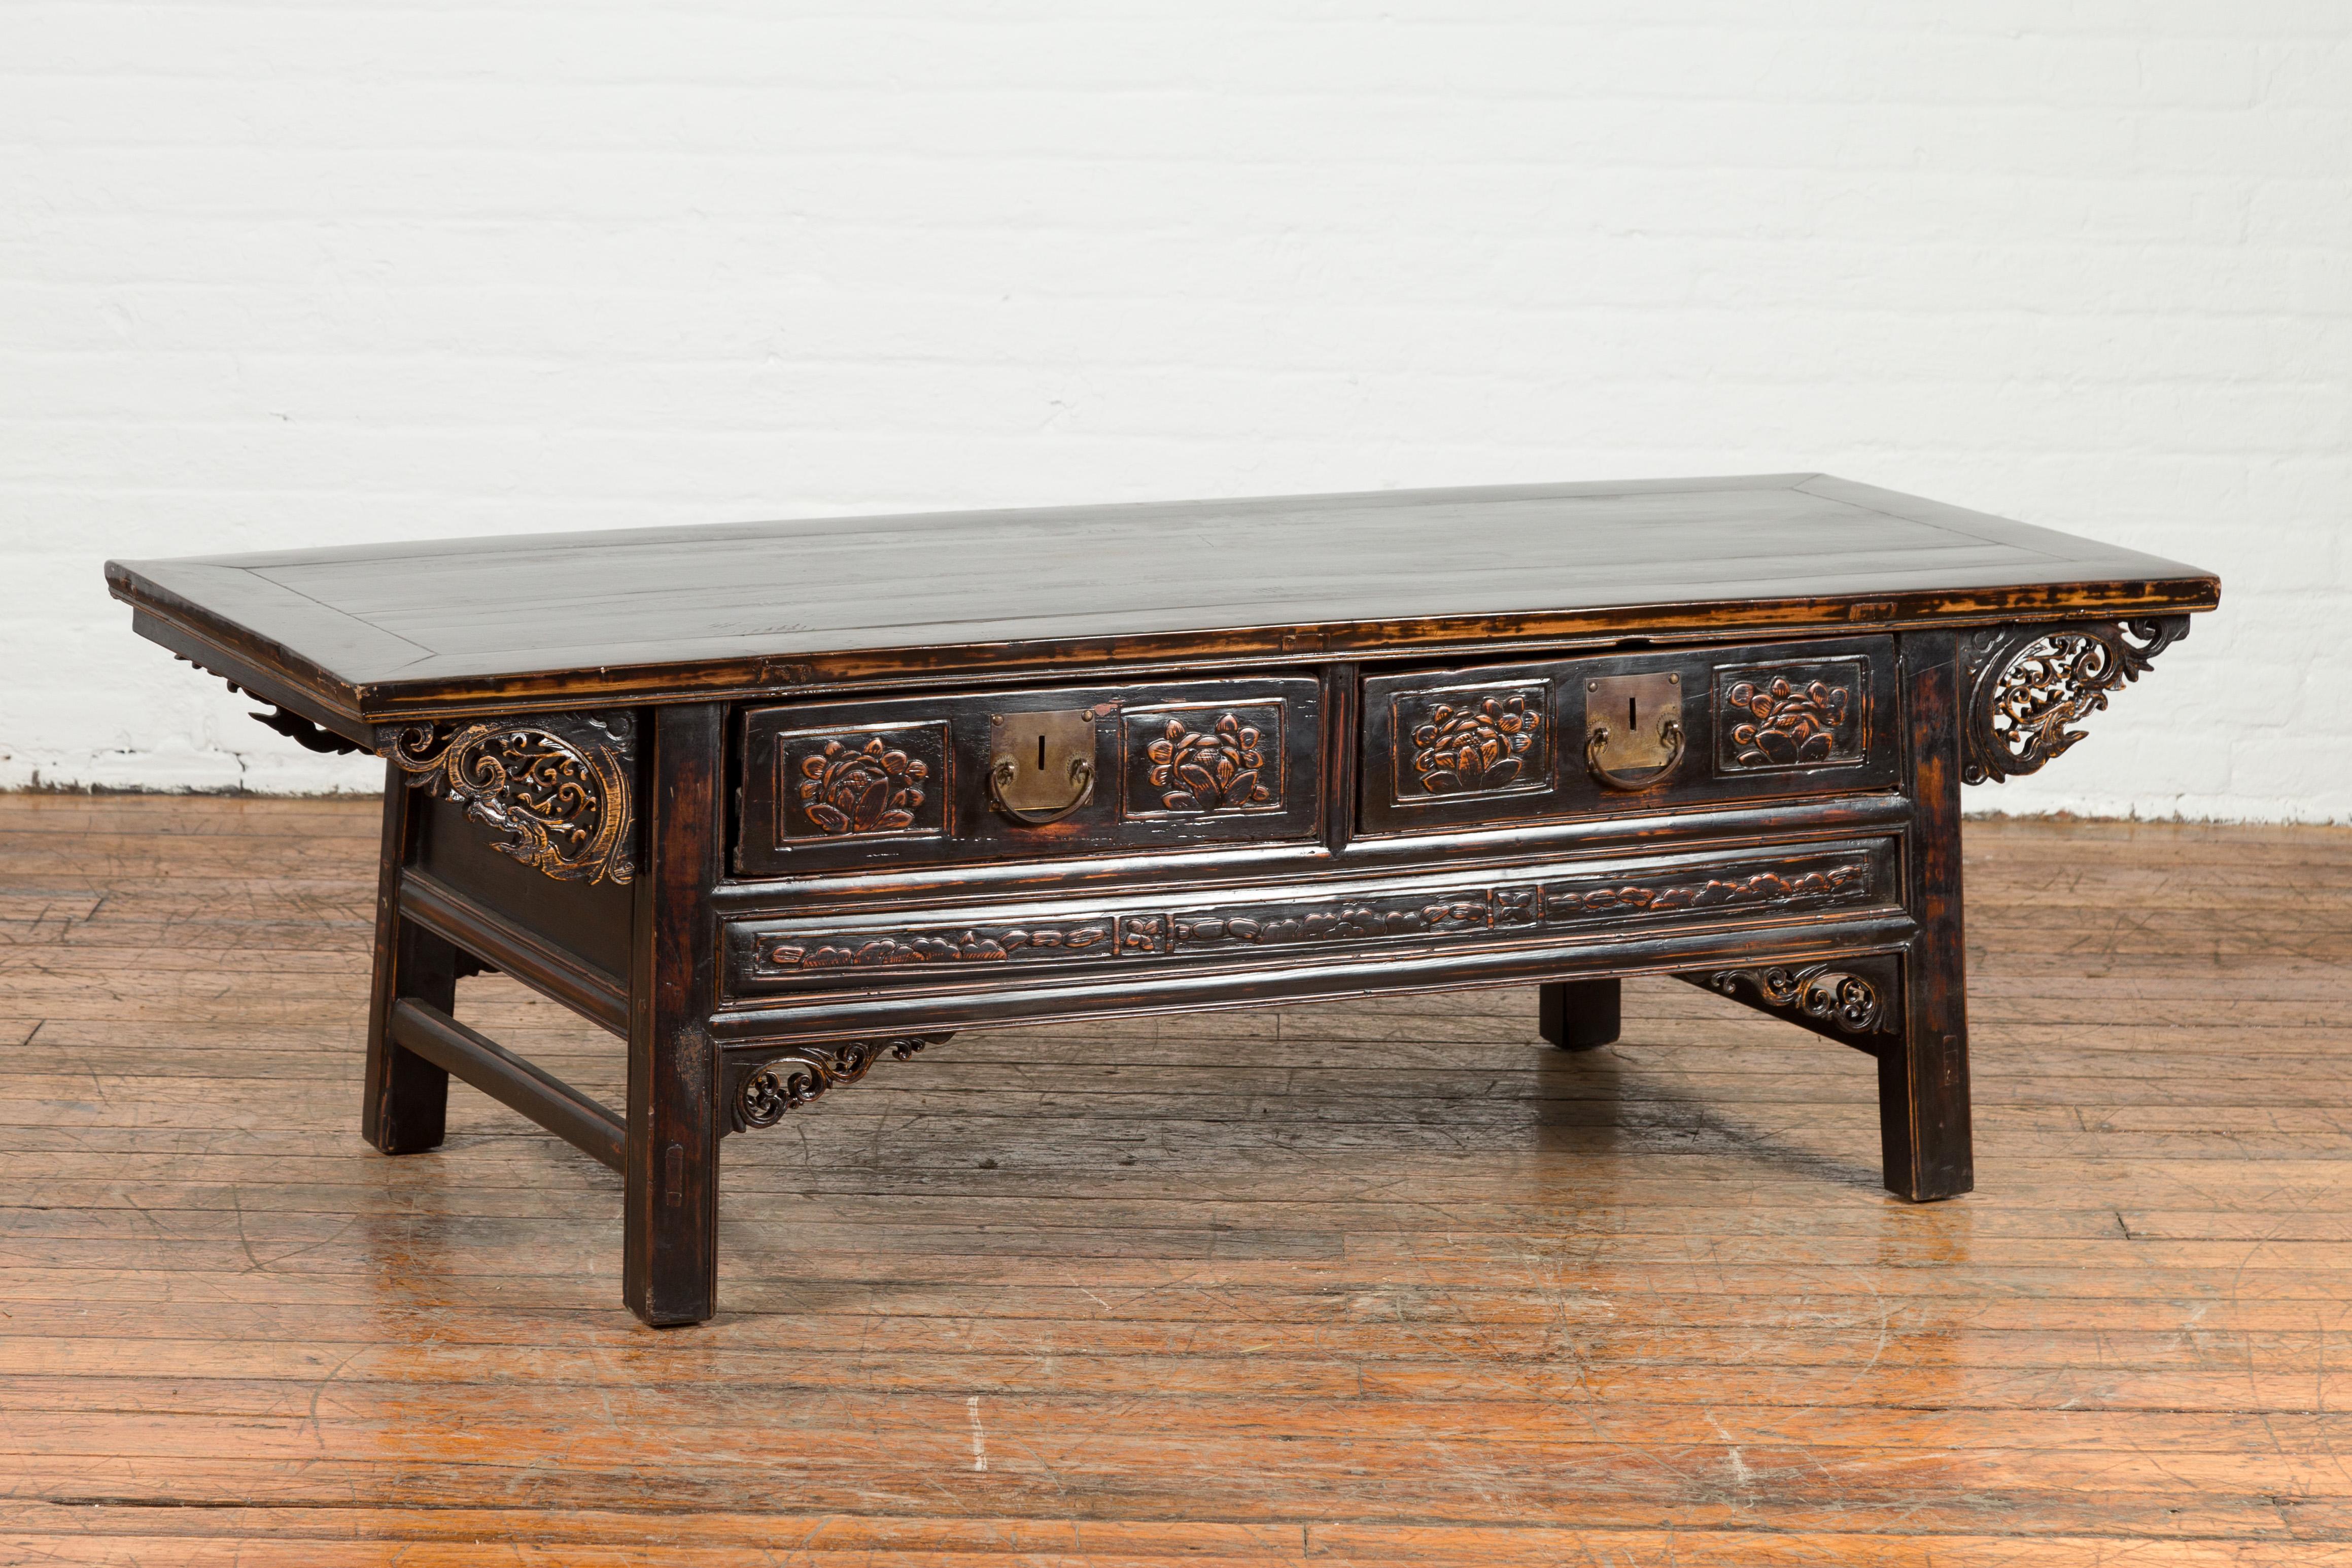 Chinese Qing Dynasty 19th Century Black Lacquer Coffee Table with Two Drawers In Good Condition For Sale In Yonkers, NY